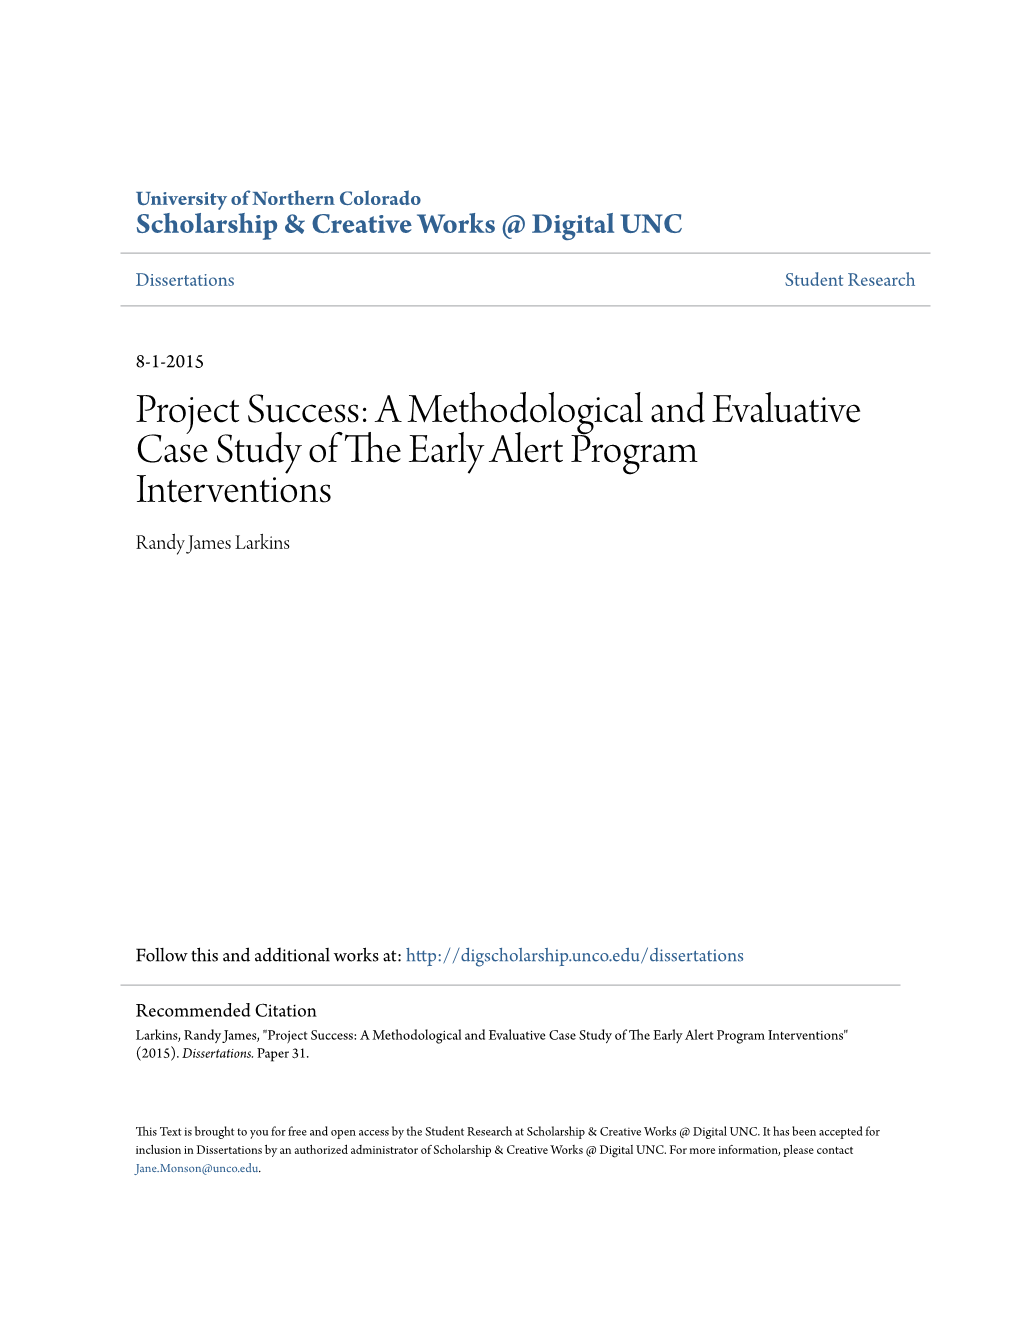 Project Success: a Methodological and Evaluative Case Study of the Early Alert Program Interventions" (2015)